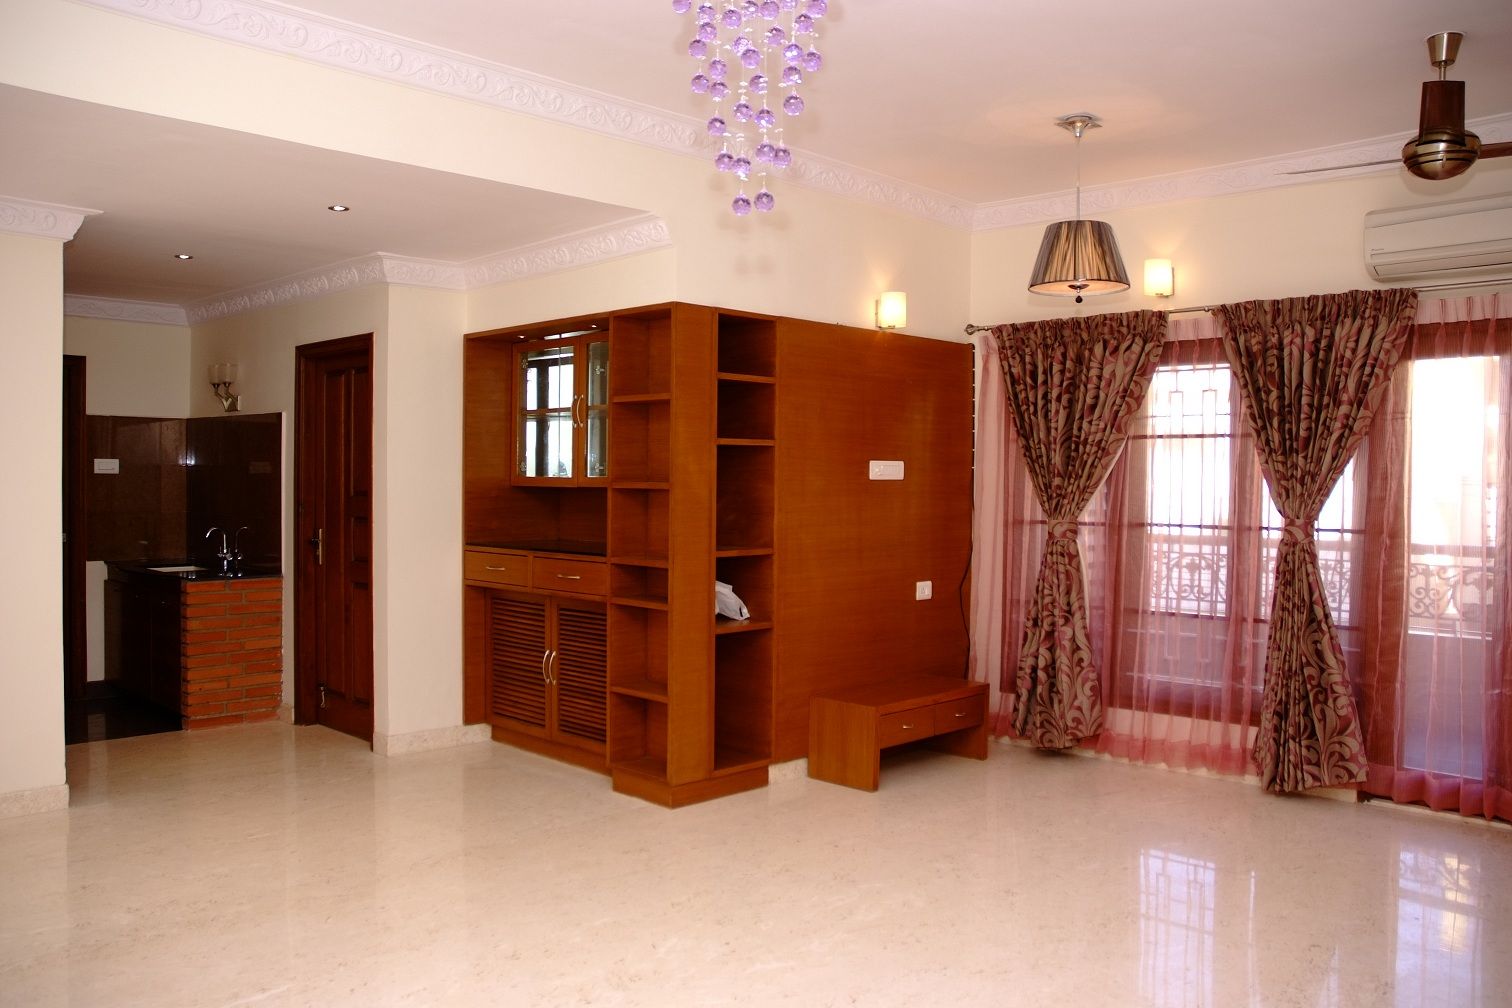 Wooden Furniture Designs For Living Room homify Living room پلائیووڈ